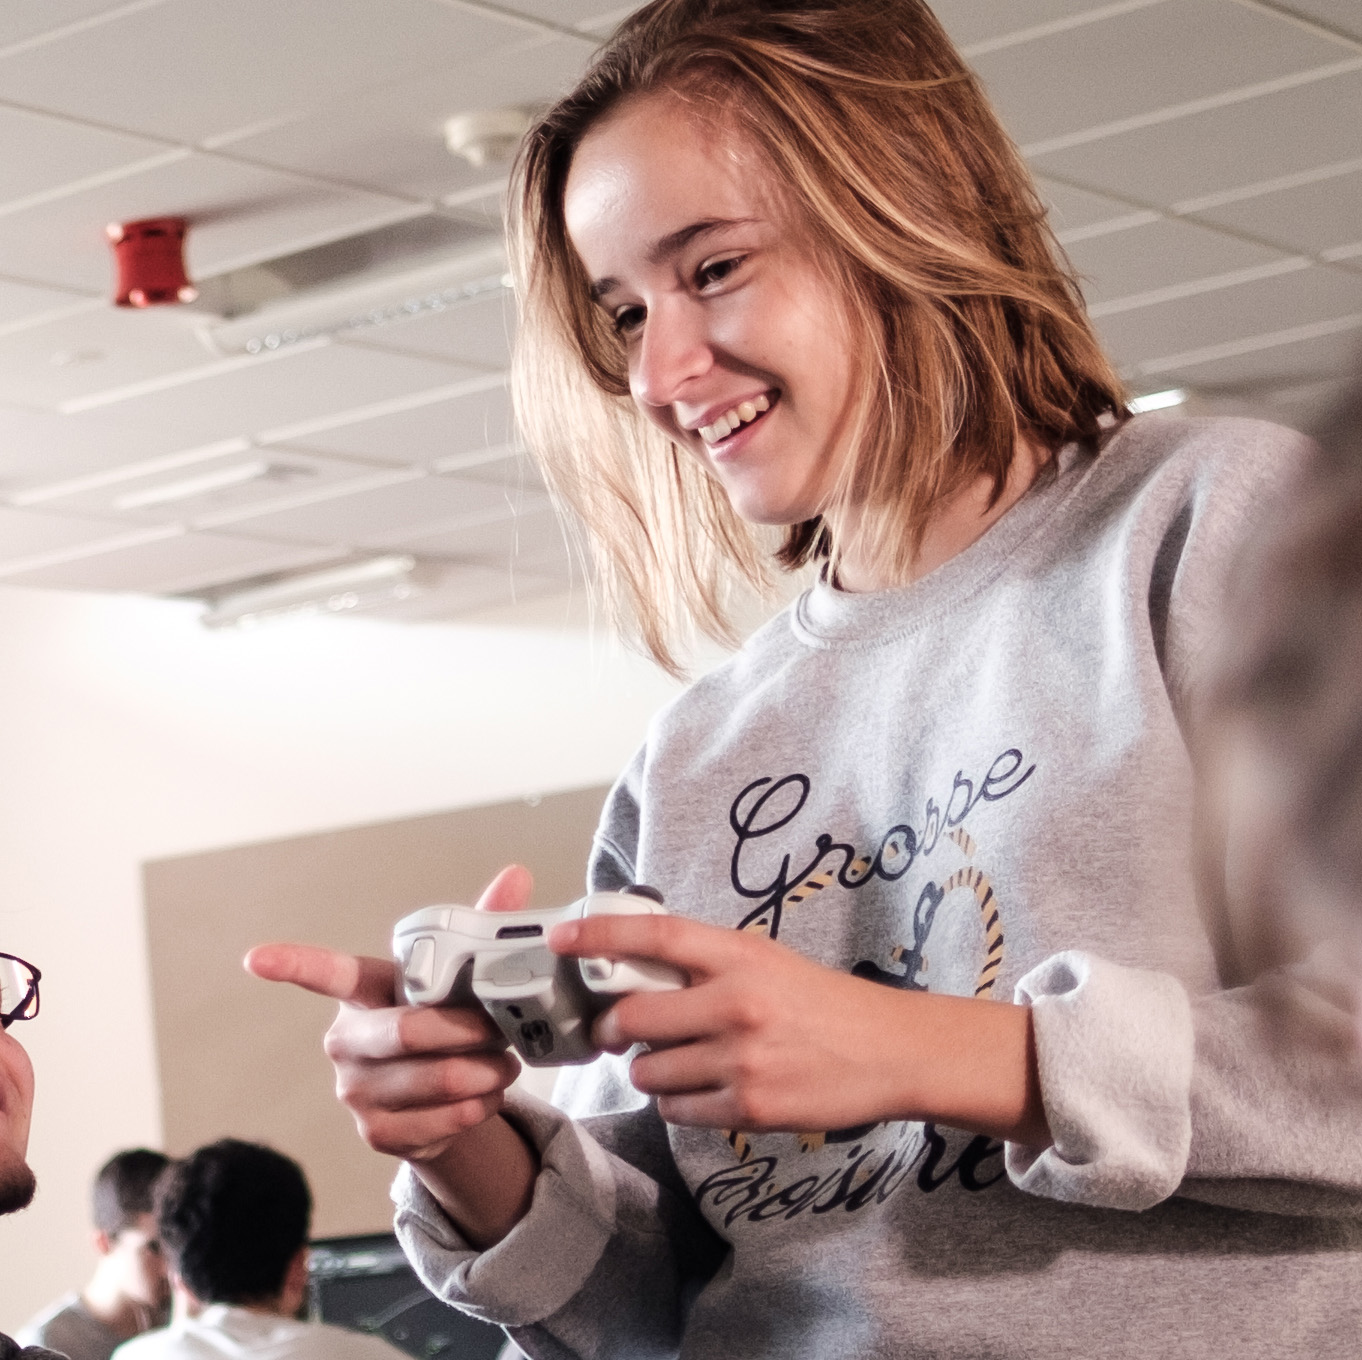 A student tests out a game using a handheld controller